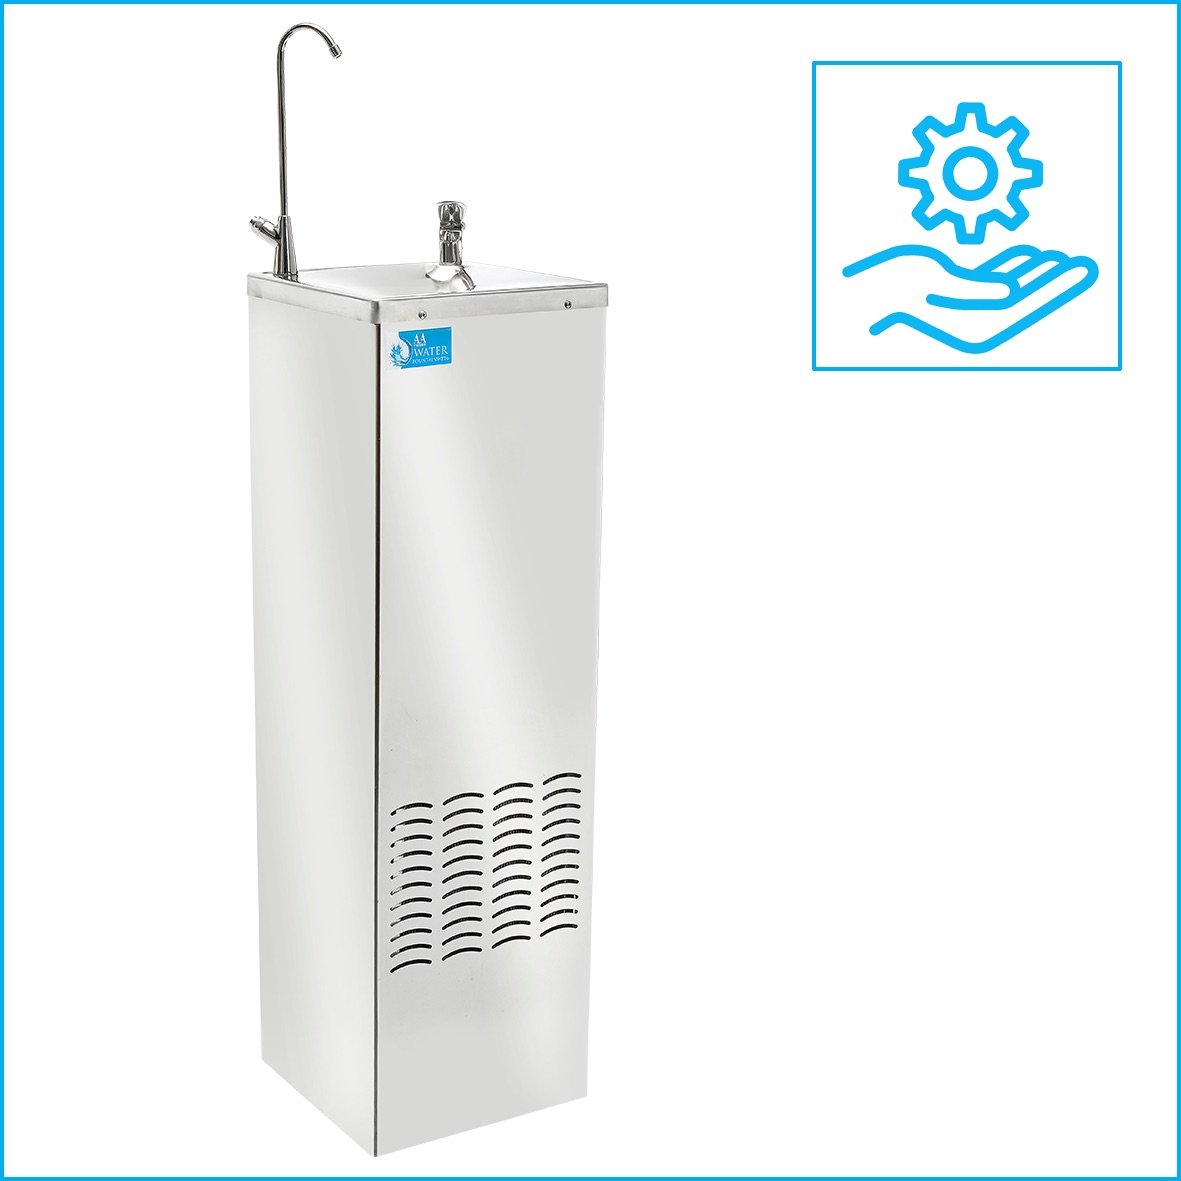 South East England water coolers, kings water coolers